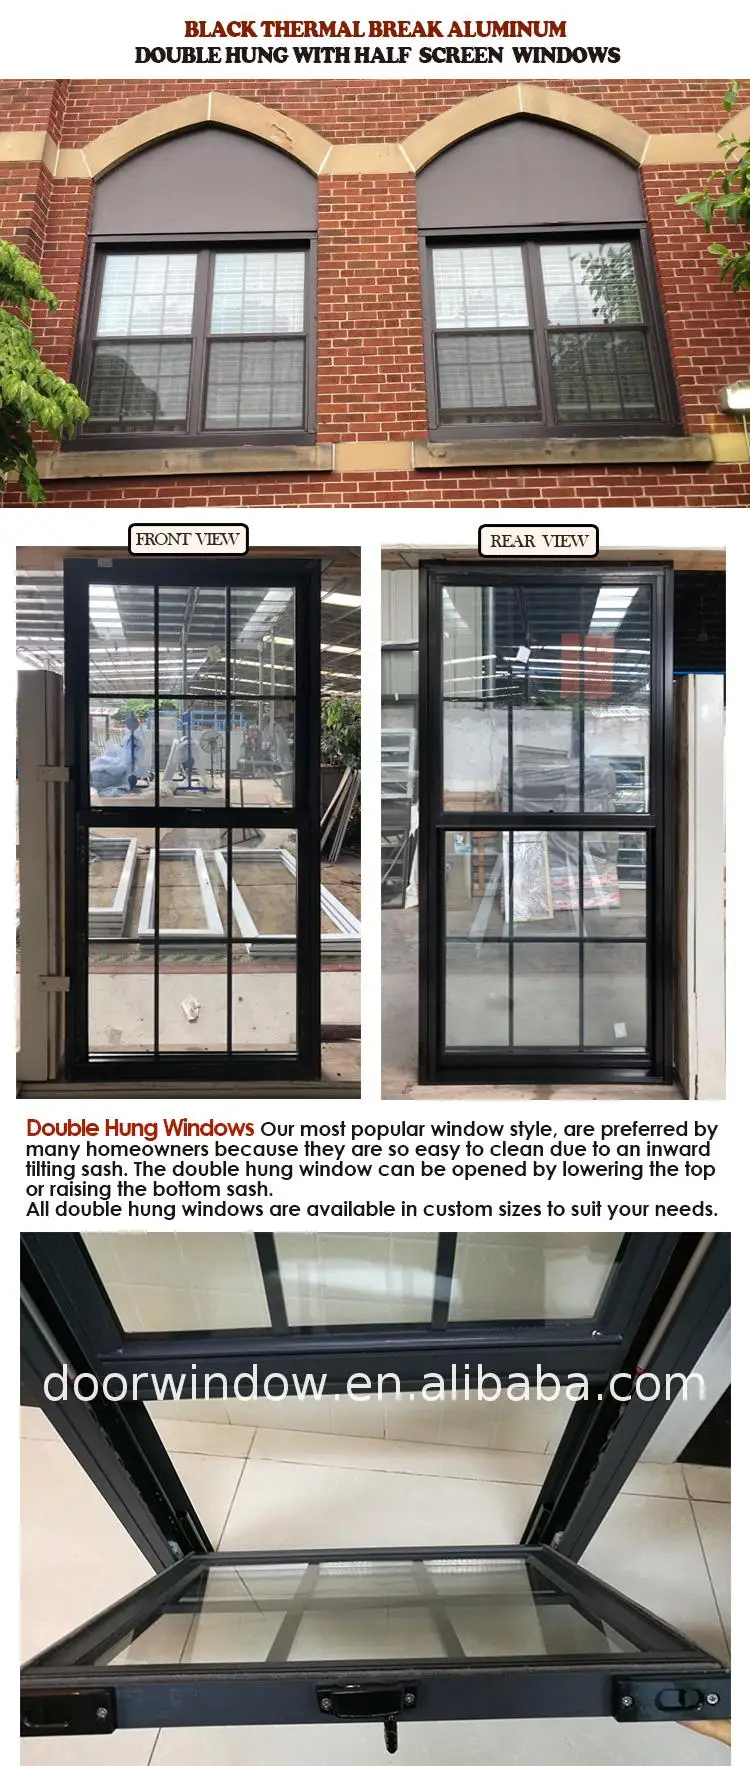 Factory price wholesale why is aluminium used for window frames can be where to buy double hung windows